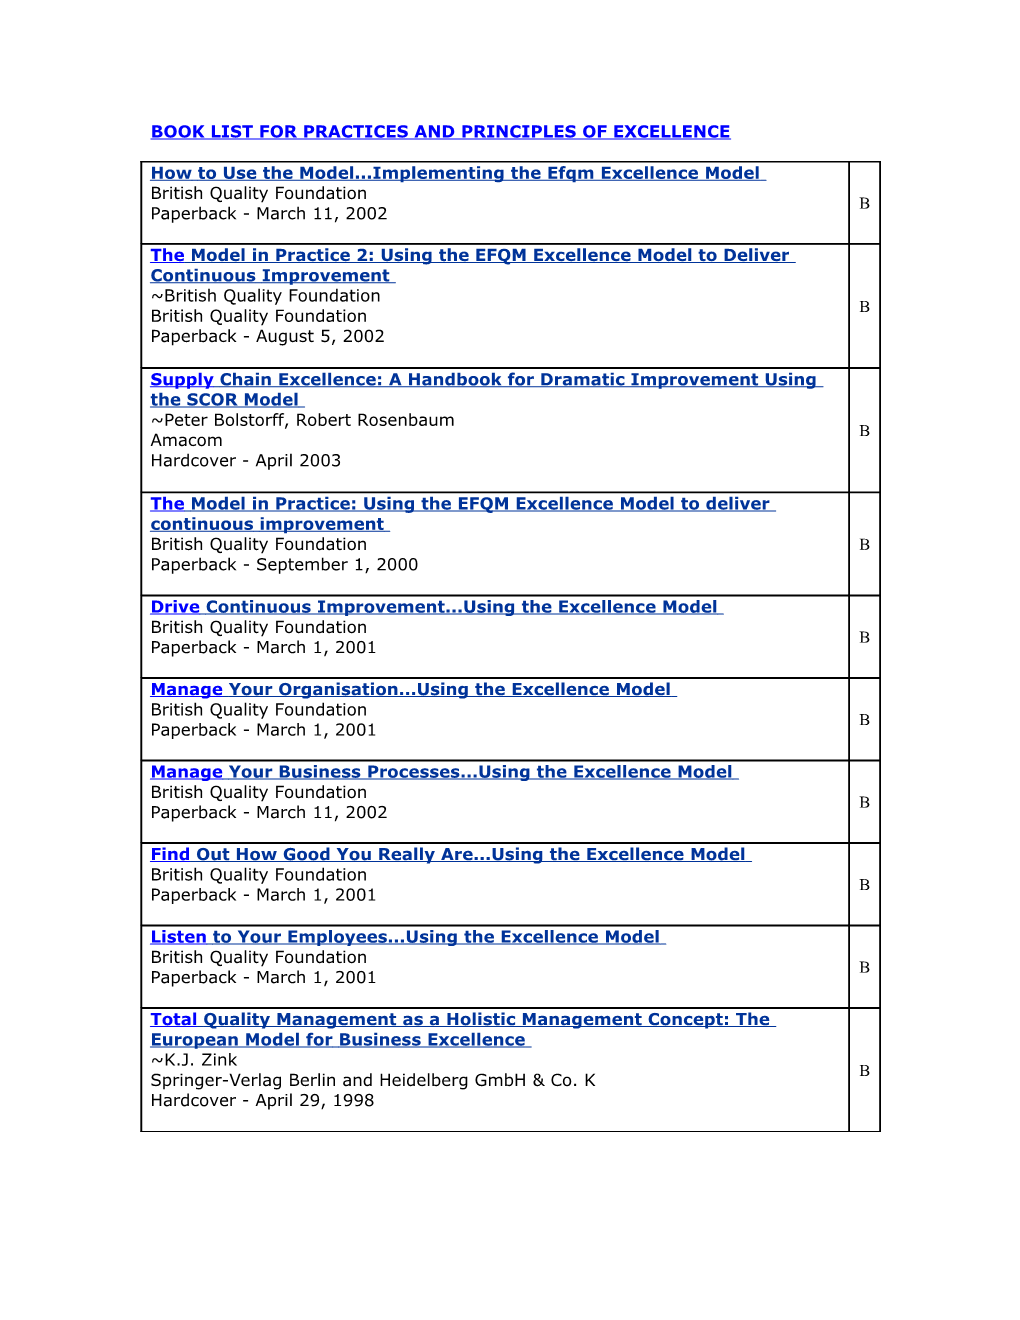 Book List for Engineering Enterprise Excellence Practices and Principles of Excellence